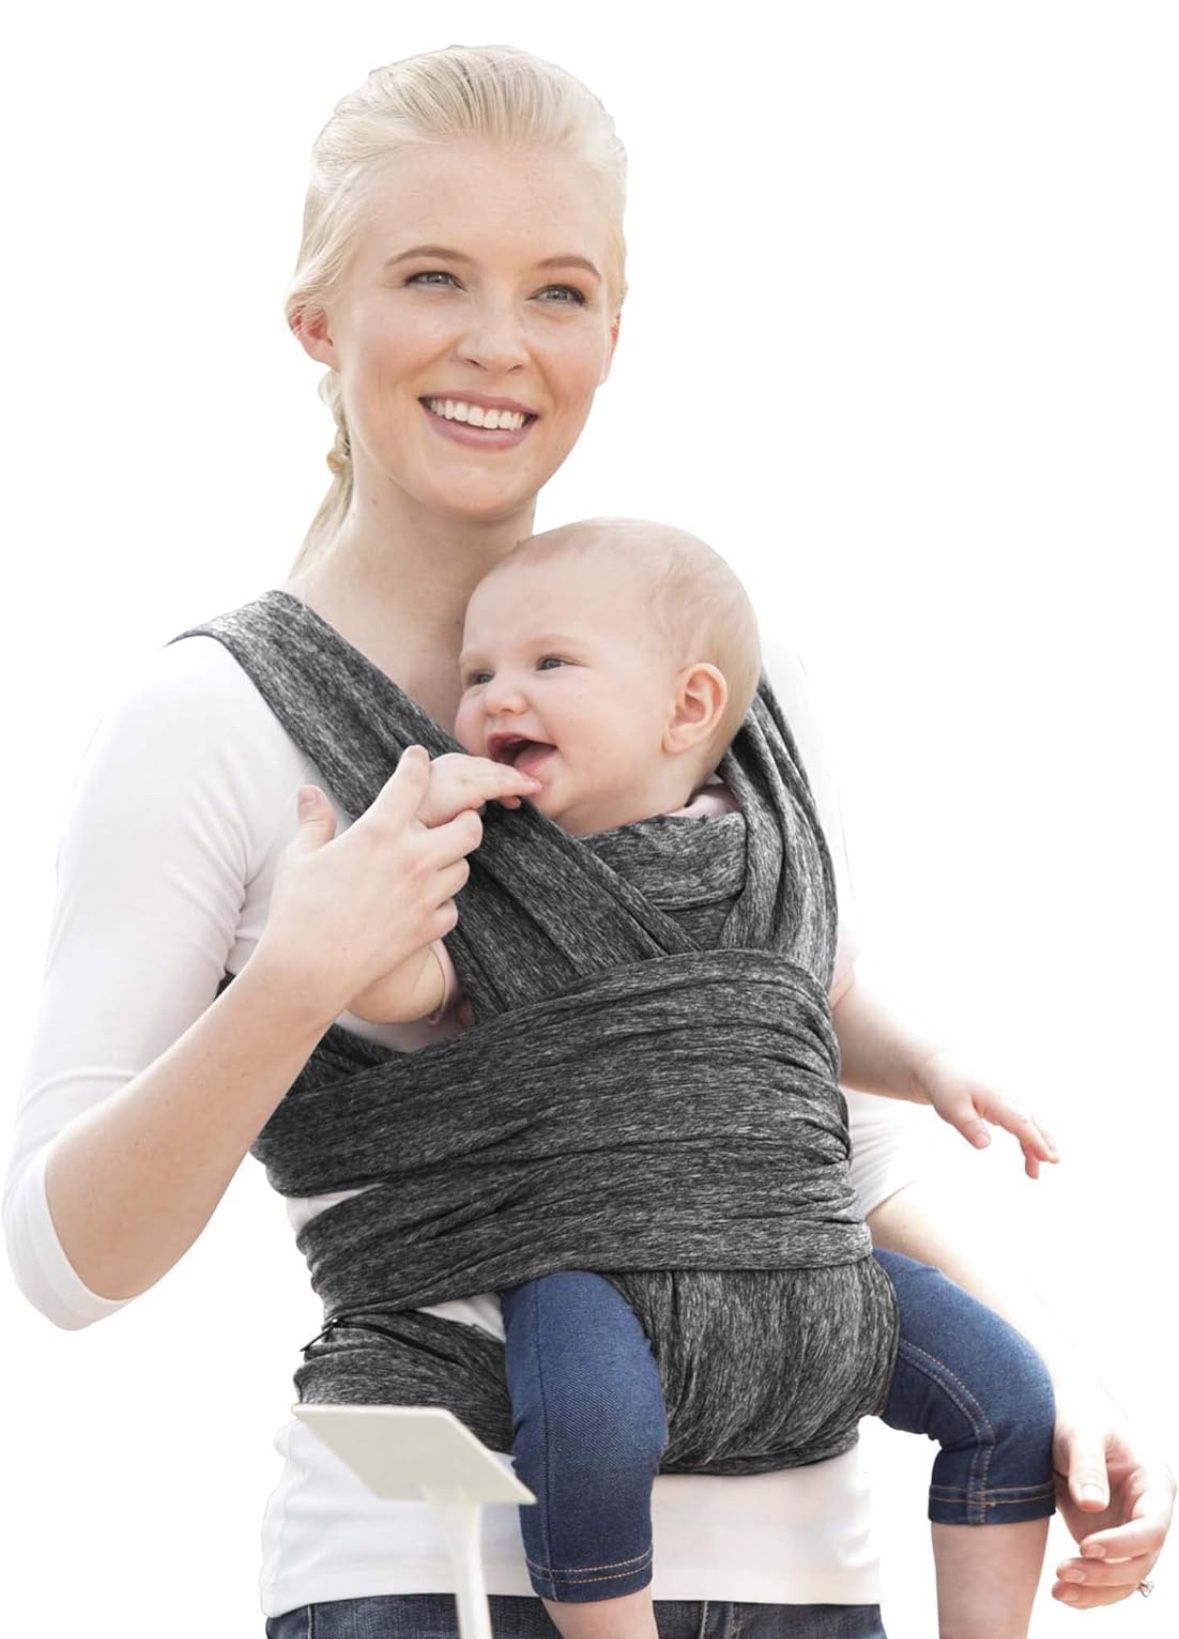 NEW Boppy Comfyfit 3-way Hybrid Baby Carrier UPF 50 Heather Gray 8-35 lbs